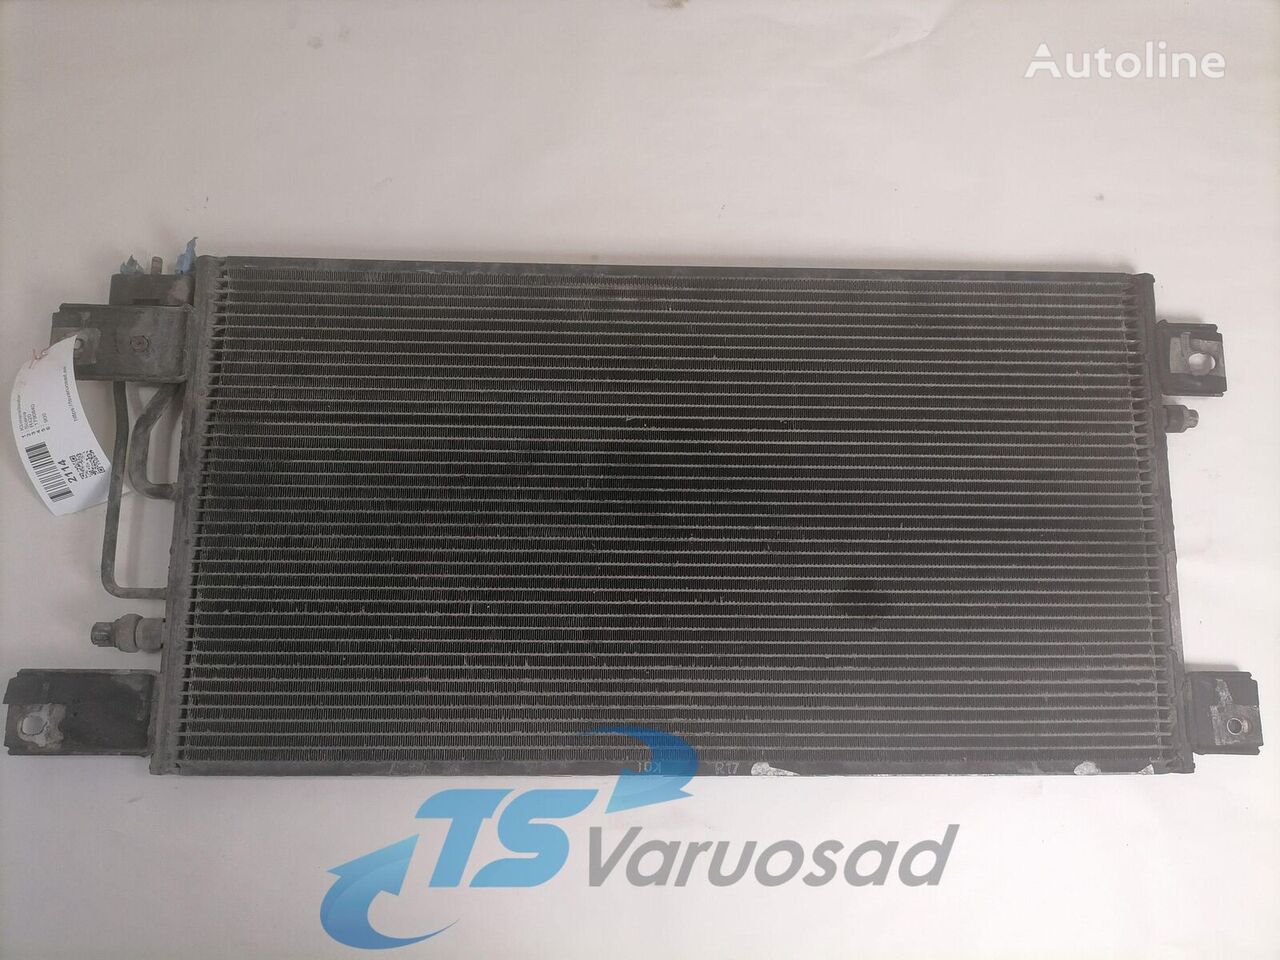 Scania A/C radiator 1790840 air conditioning condenser for Scania R420 truck tractor